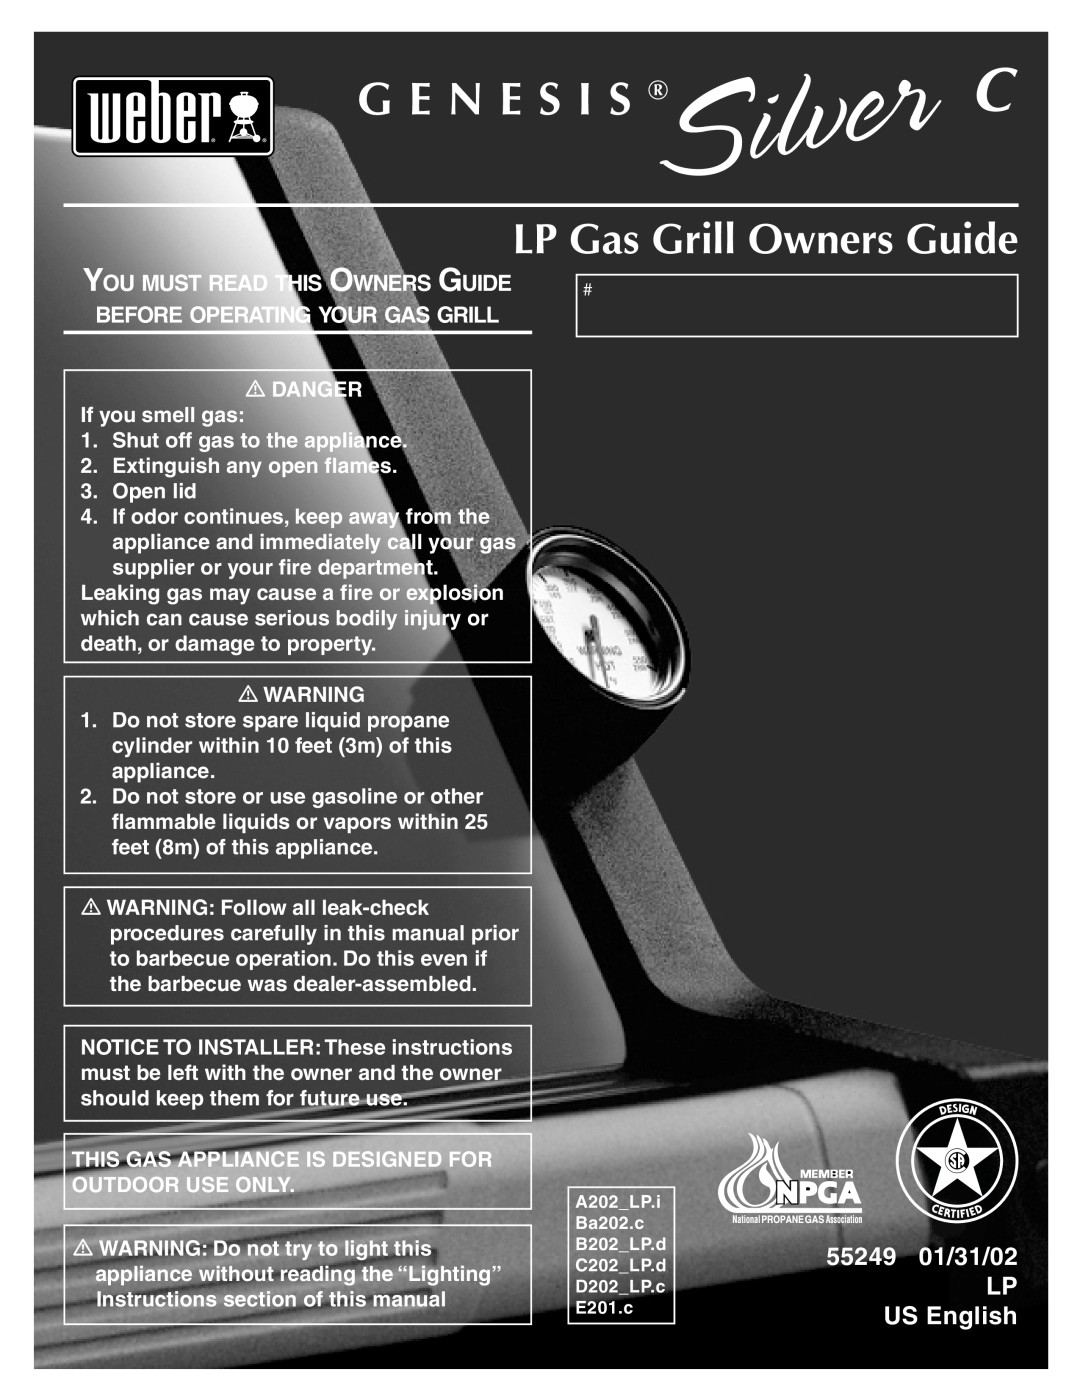 Weber manual LP Gas Grill Owners Guide, G E N E S I S, 55249 01/31/02 LP US English 